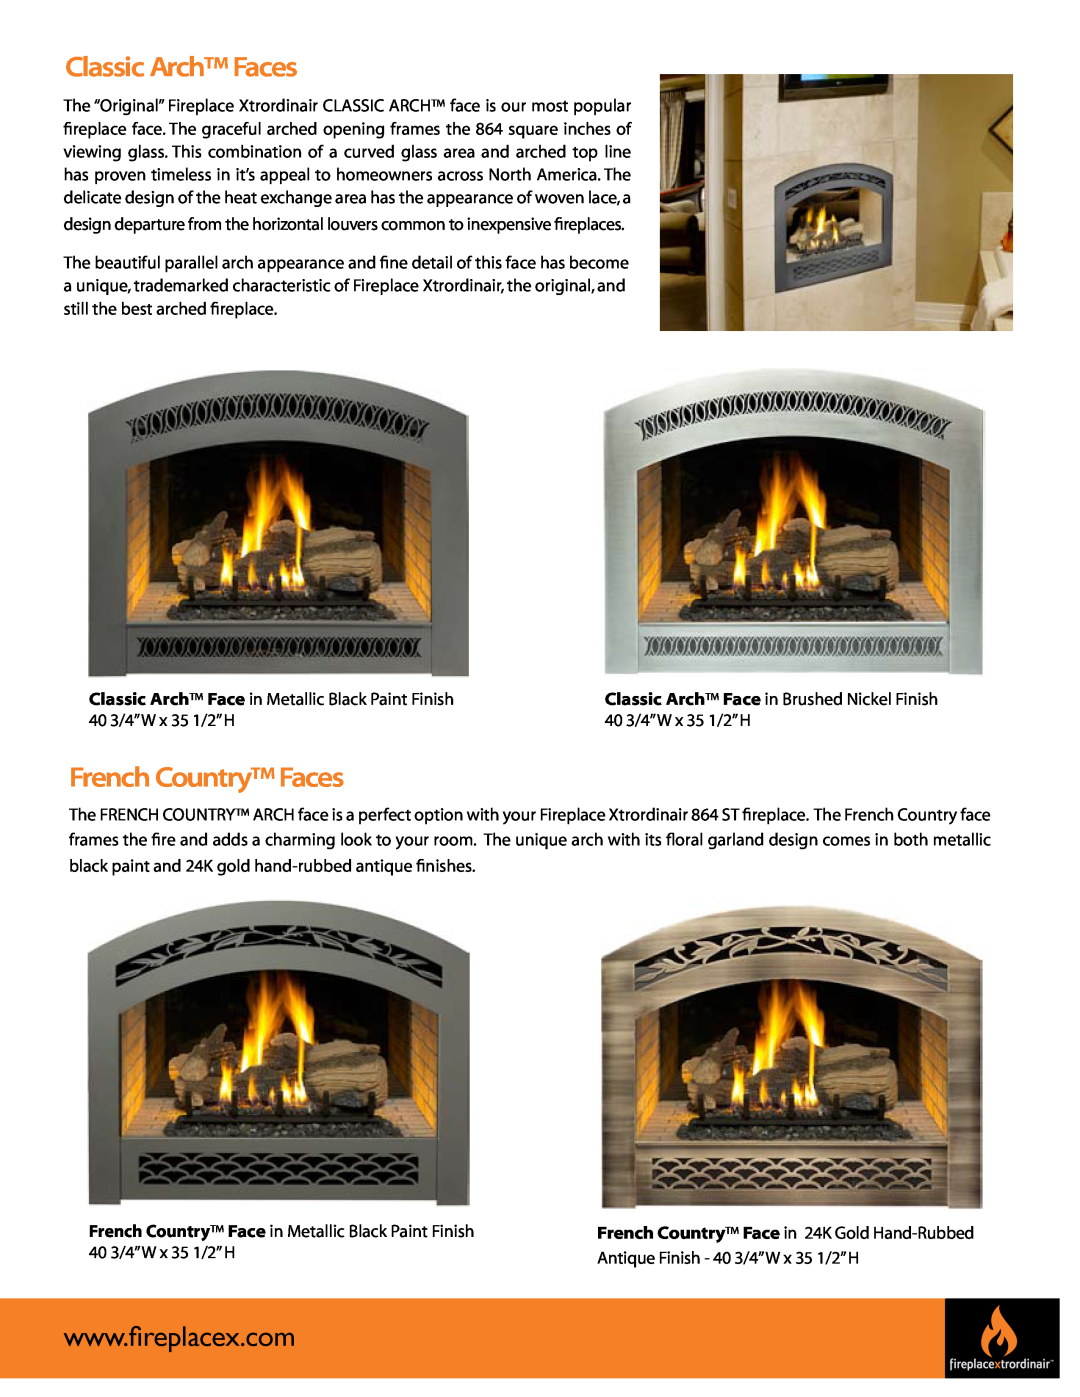 FireplaceXtrordinair 864 See-Thru manual Classic Arch Faces, French Country Faces 